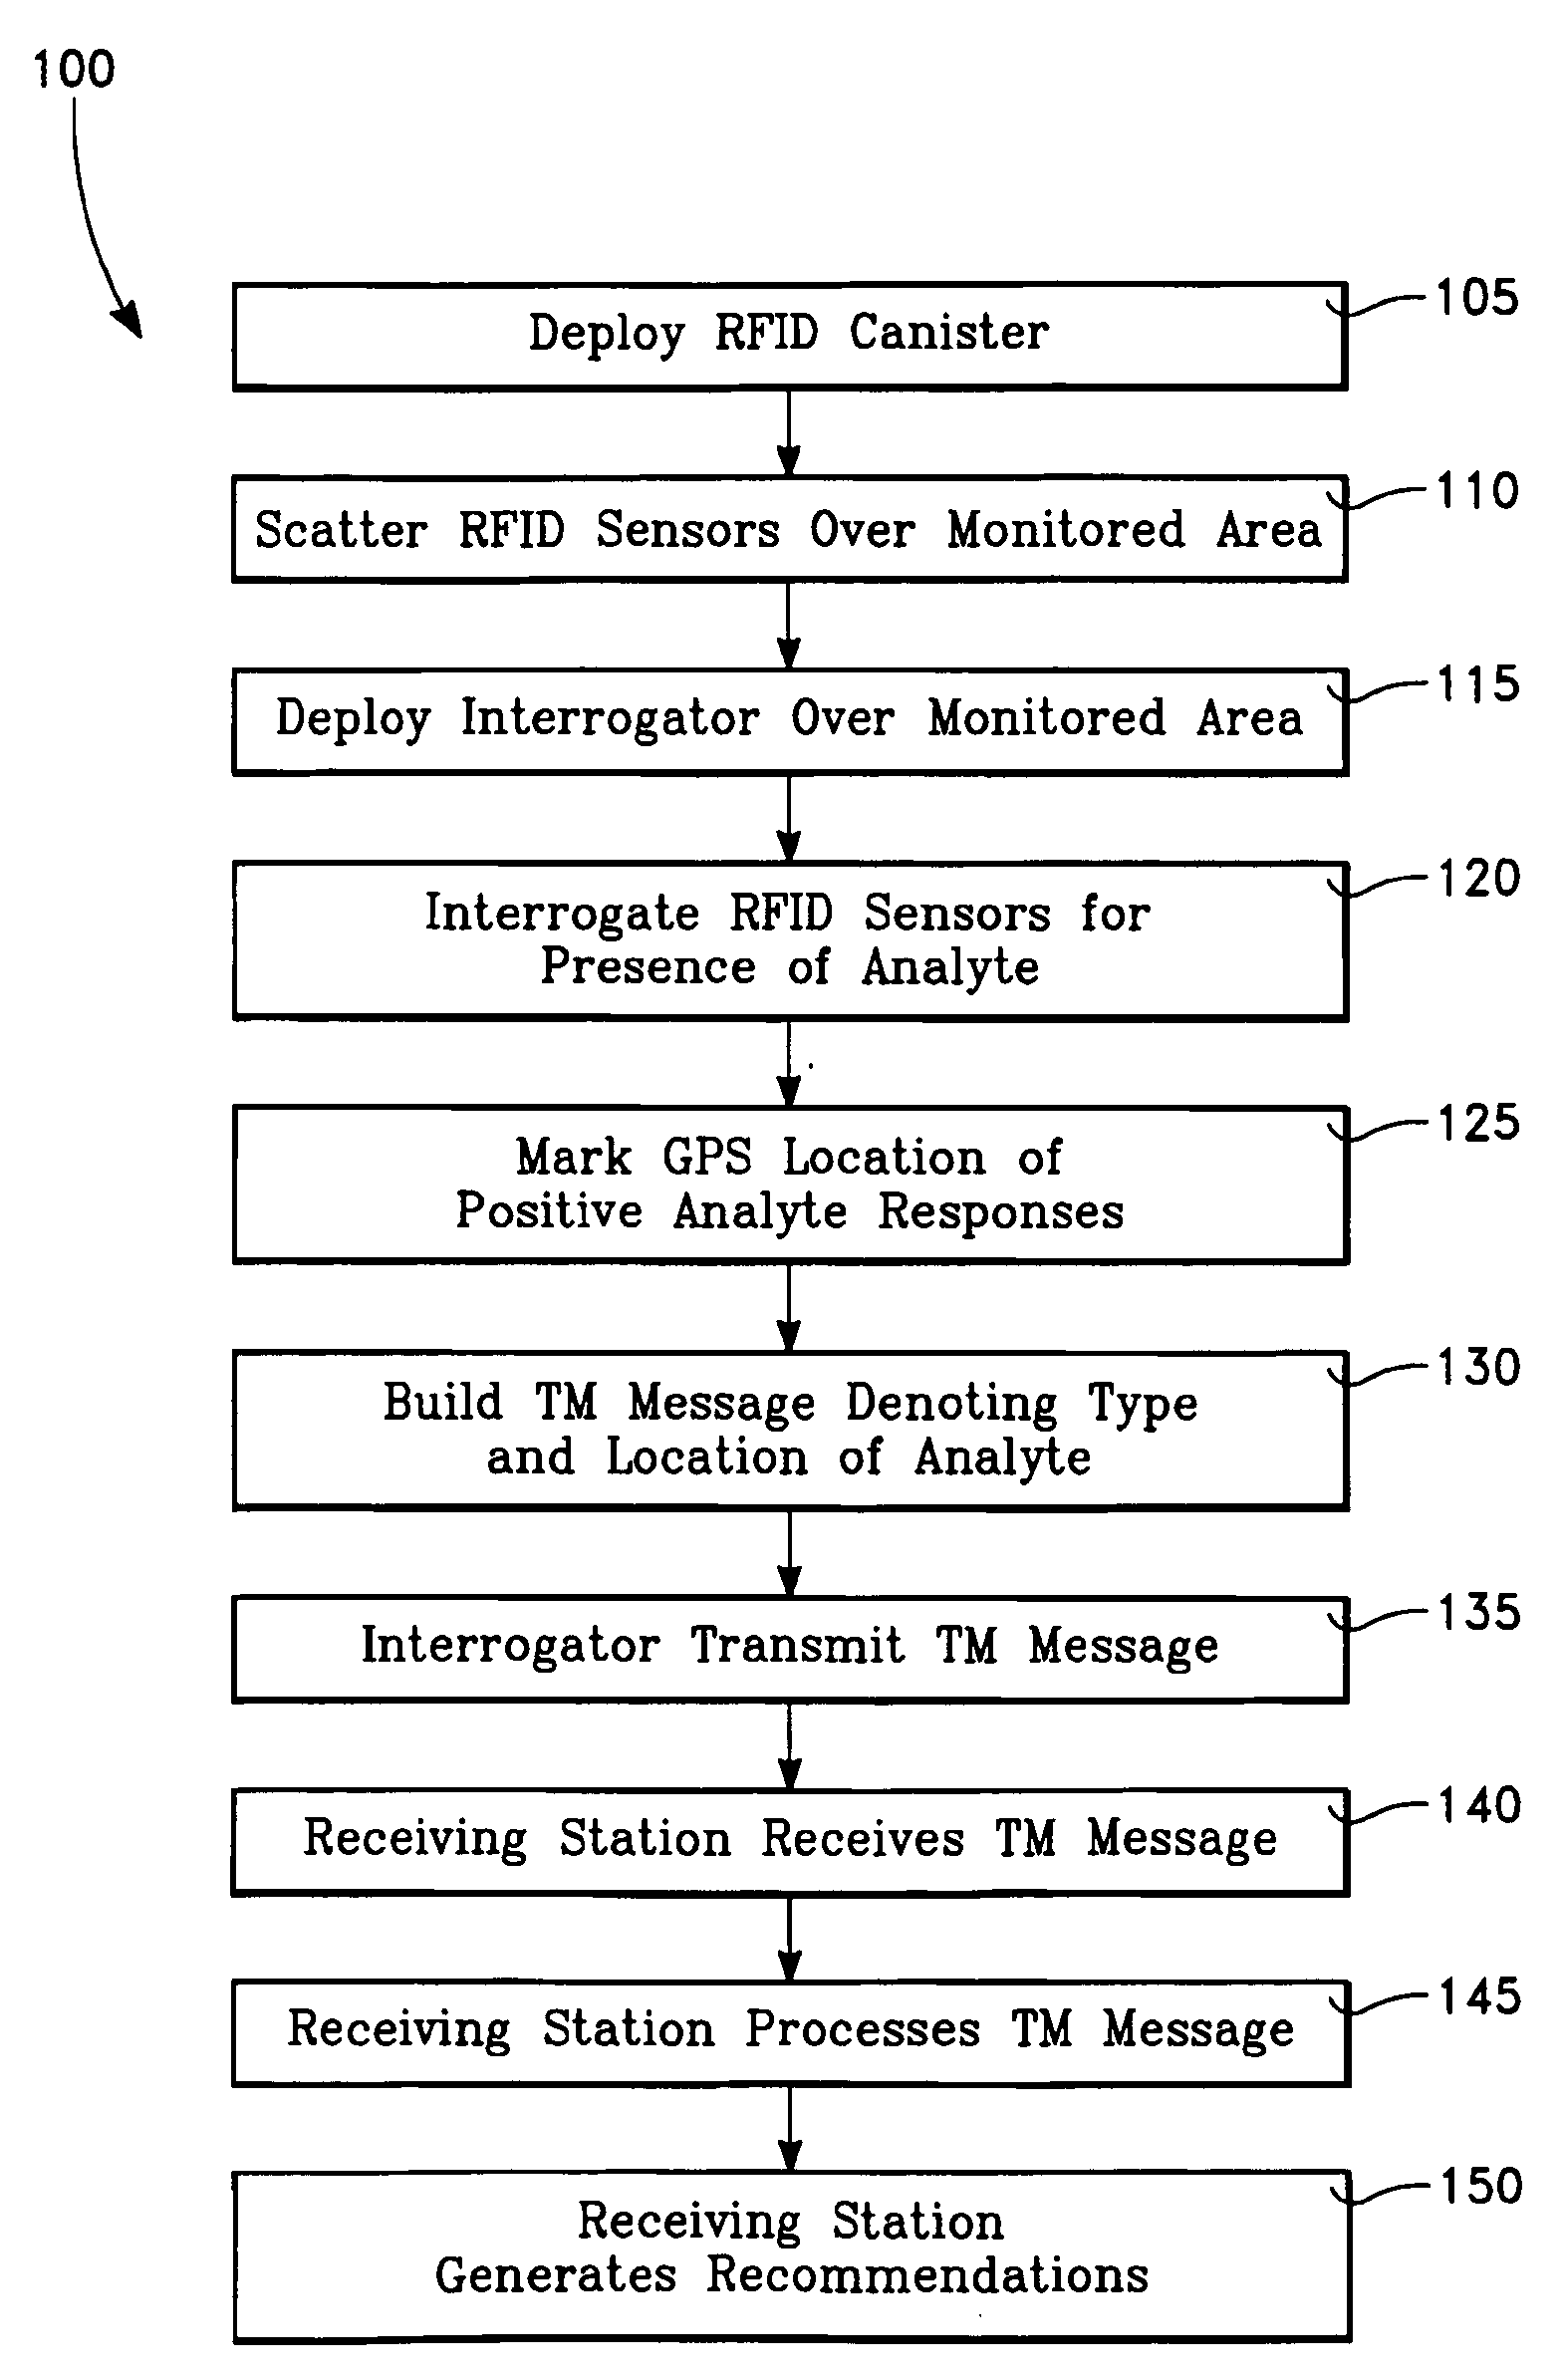 Airborne Deployed Radio Frequency Identification Sensing System to Detect an Analyte